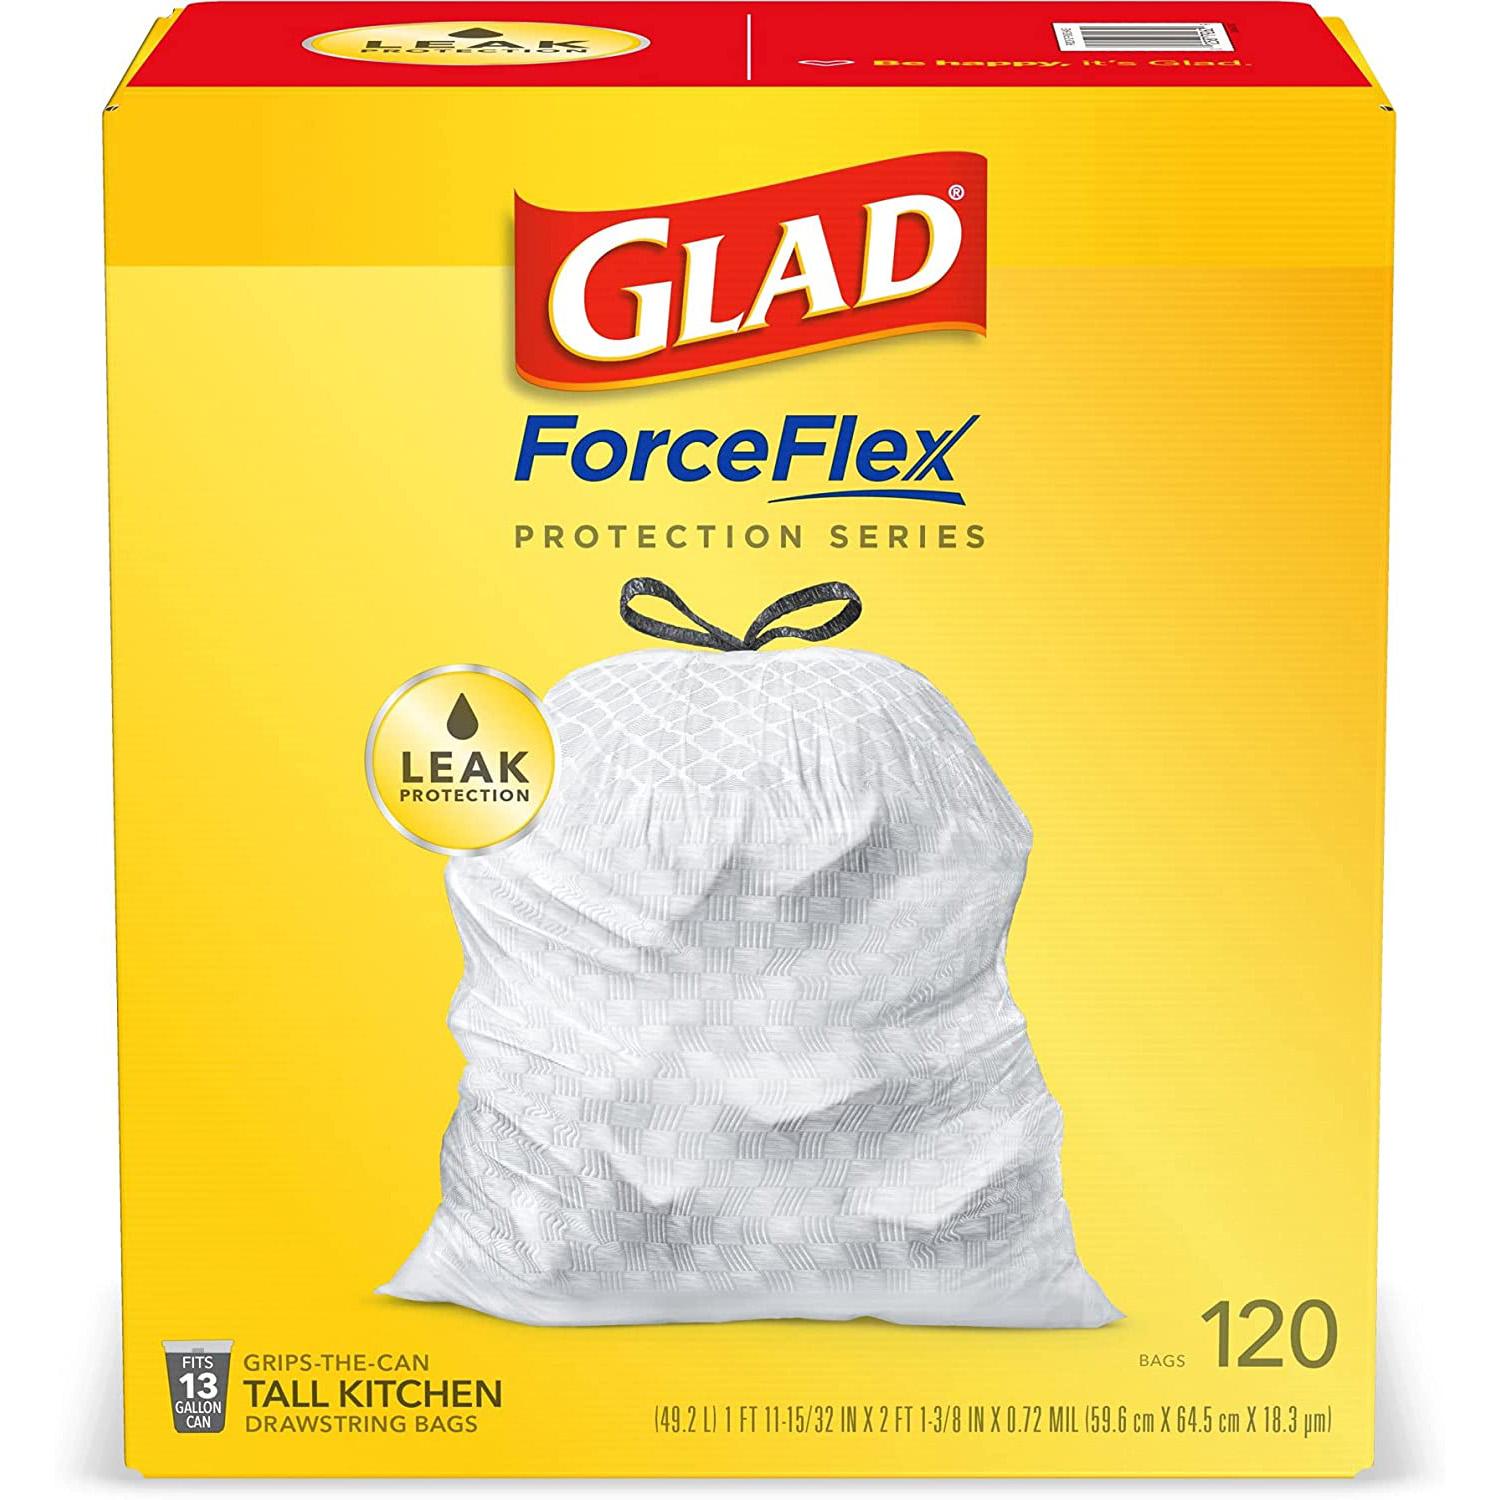 13-Gallon Glad ForceFlex Tall Kitchen Trash Bags 120 Pack for $14.84 Shipped